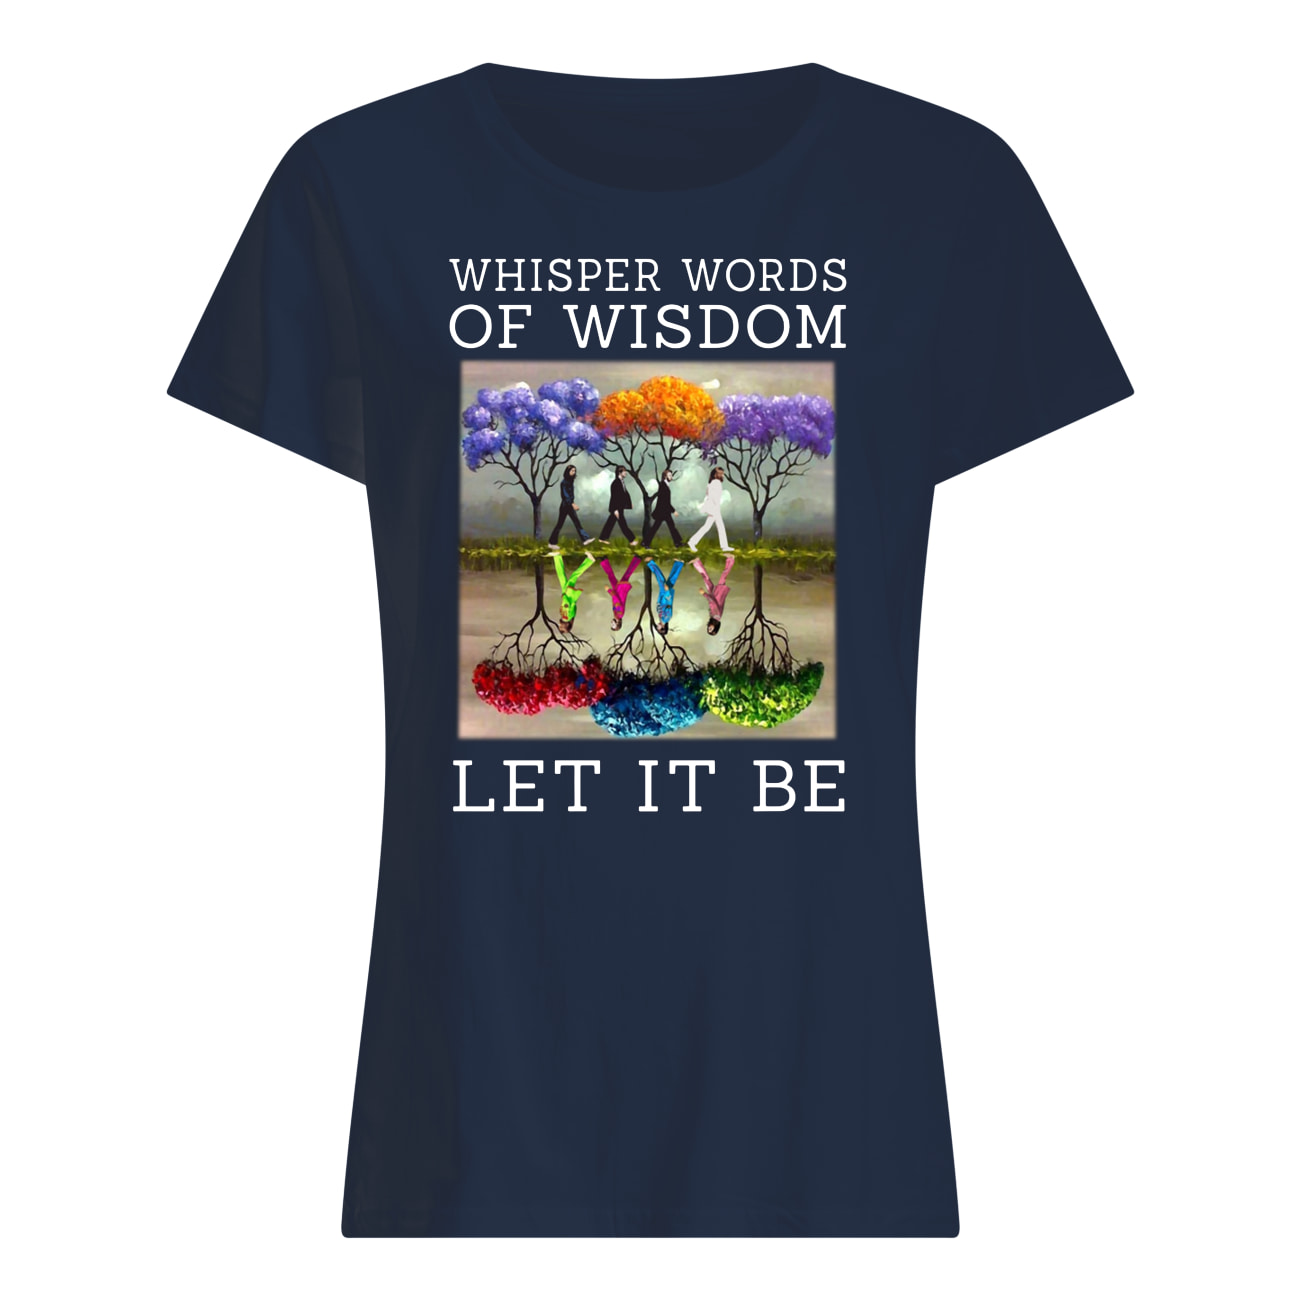 The beatle painting tree whisper words of wisdom let it be womens shirt